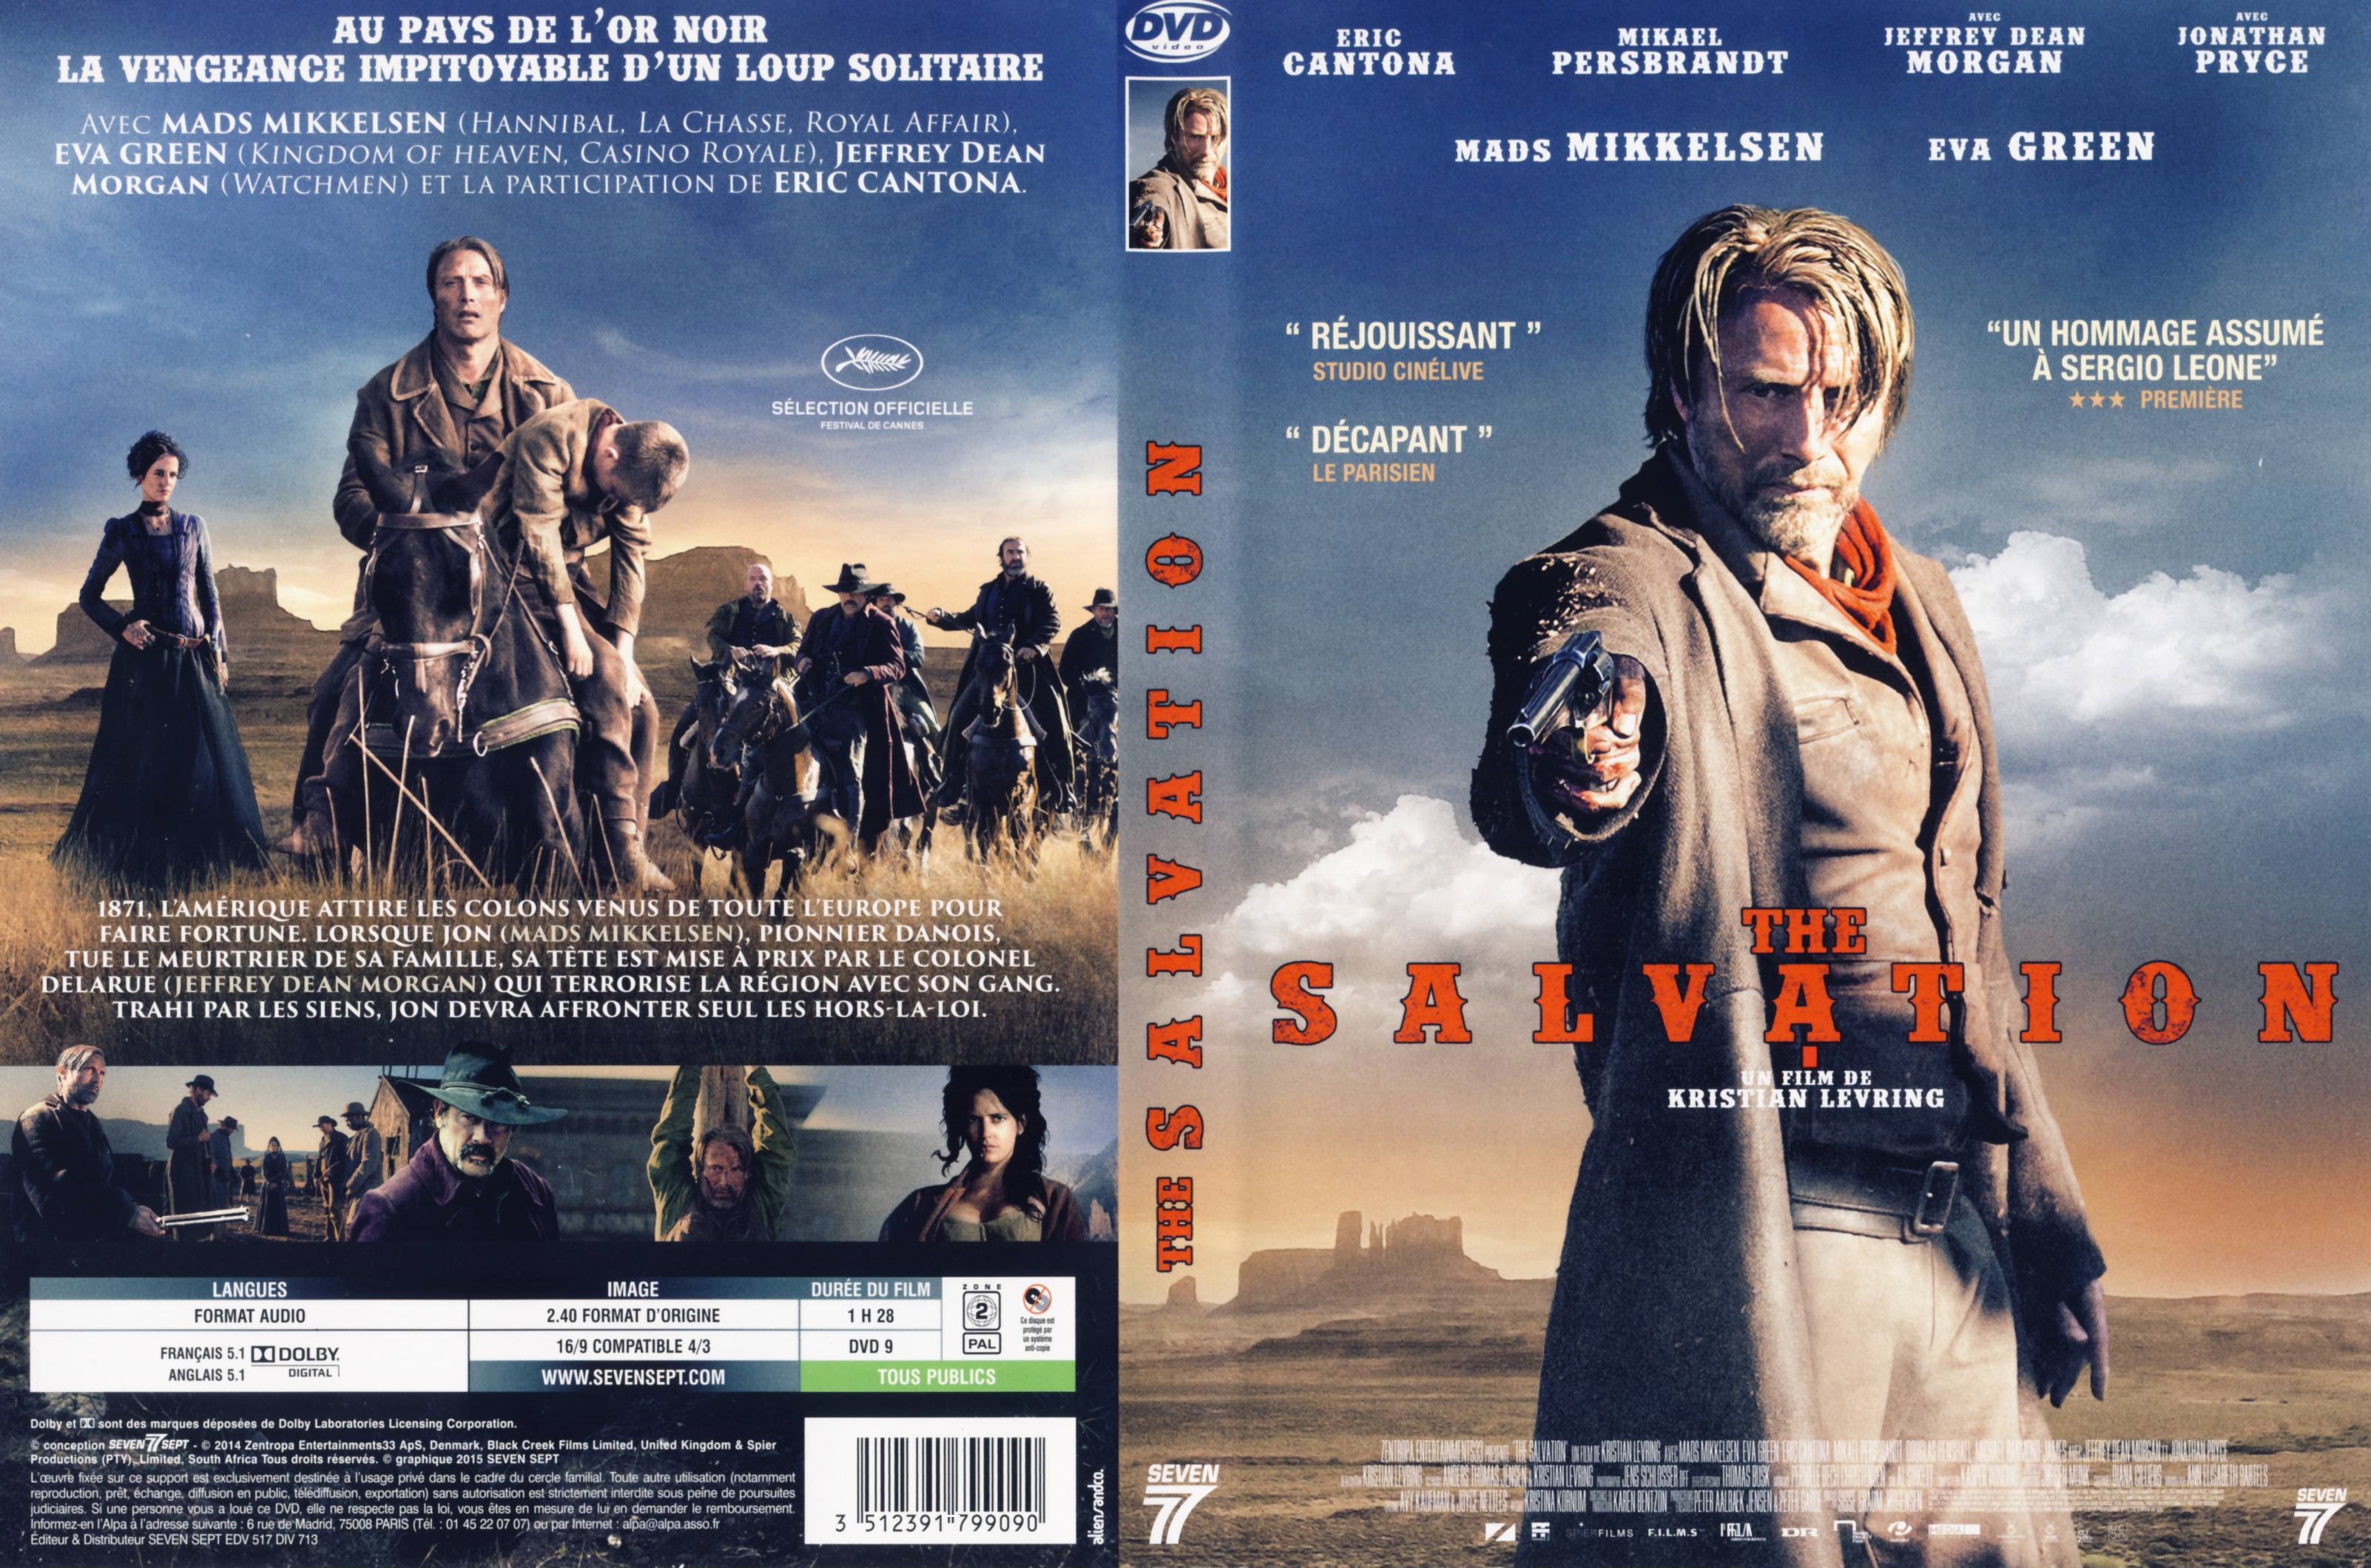 Jaquette DVD The Salvation